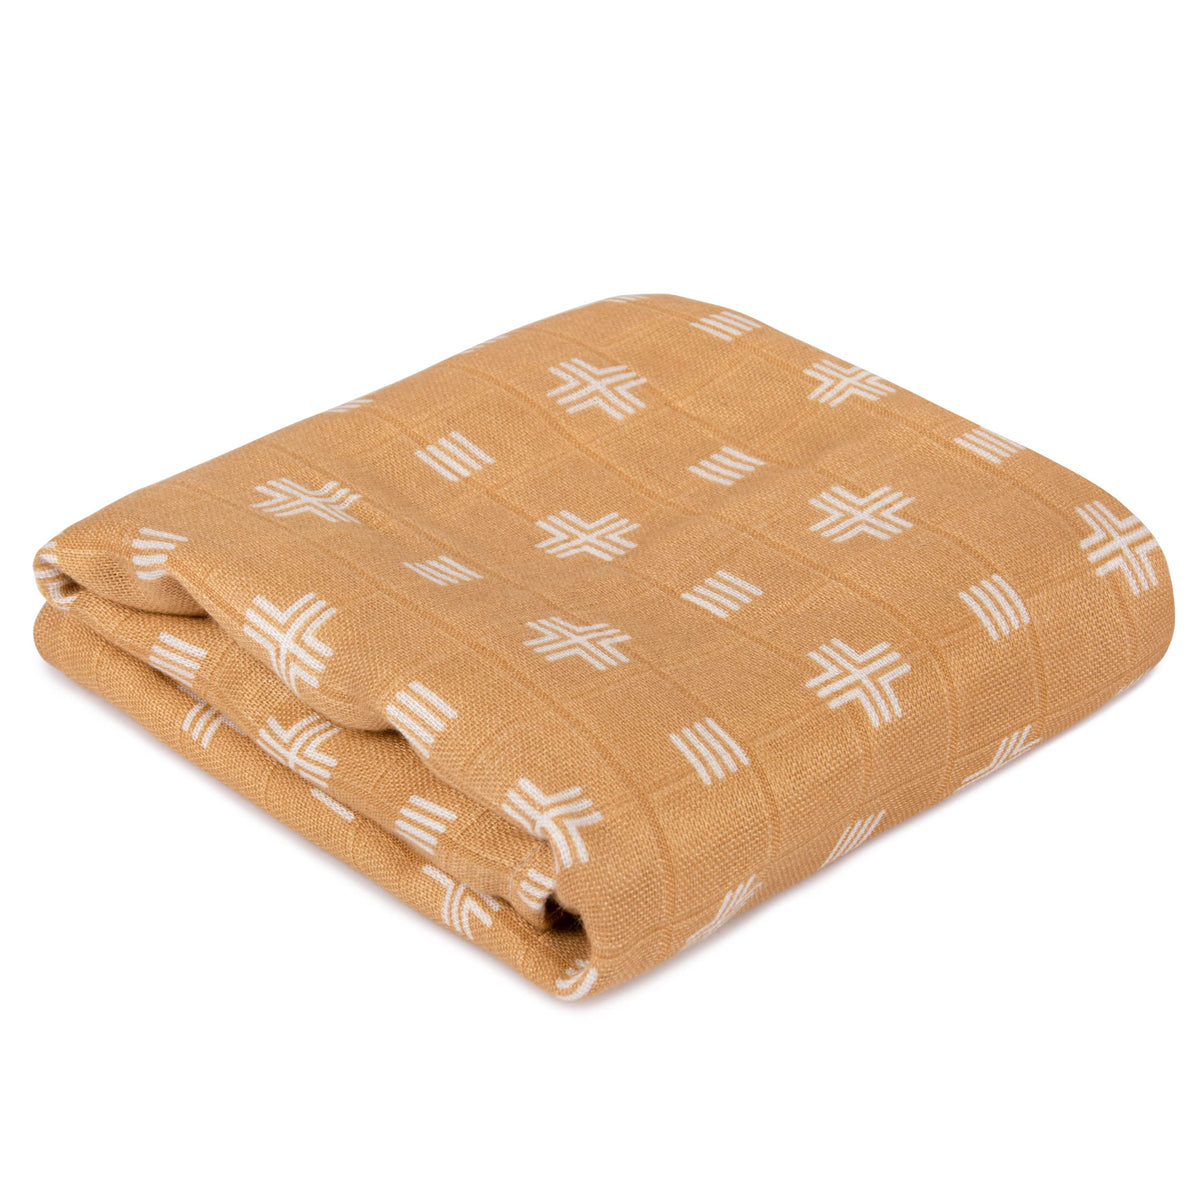 Mush 100% Bamboo Swaddle : Ultra Soft, Breathable, Thermoregulating, Absorbent, Light Weight and Multipurpose Bamboo Wrapper/Baby Bath Towel/Blanket (1, Geo Mustard)